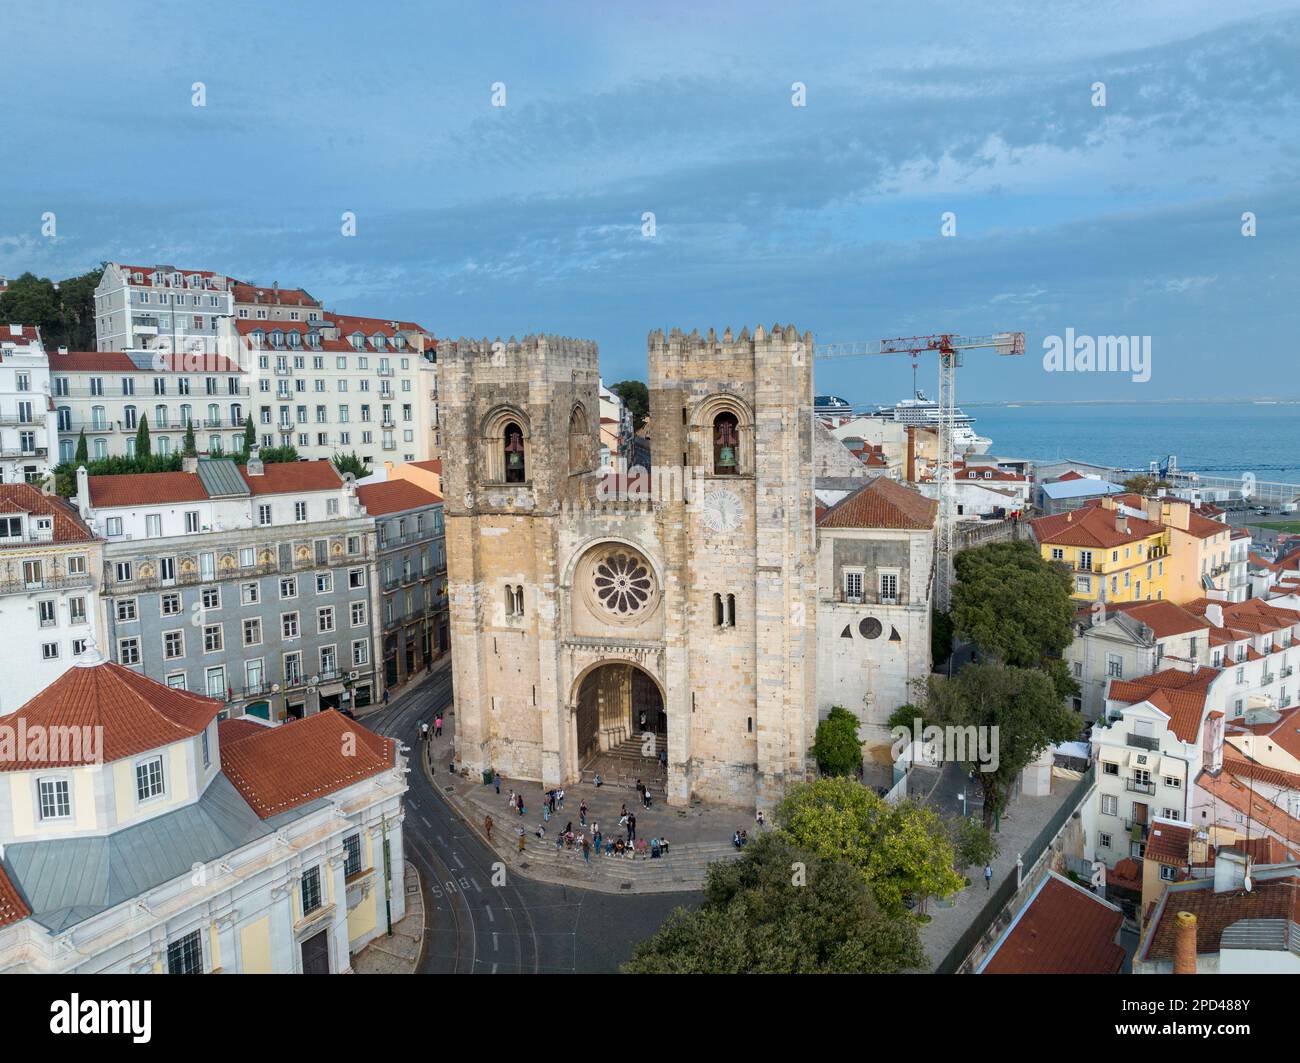 Lisbon Cathedral of Saint Mary Major. Downtown Old Town of Lisbon, Portugal. Drone Point of View Stock Photo